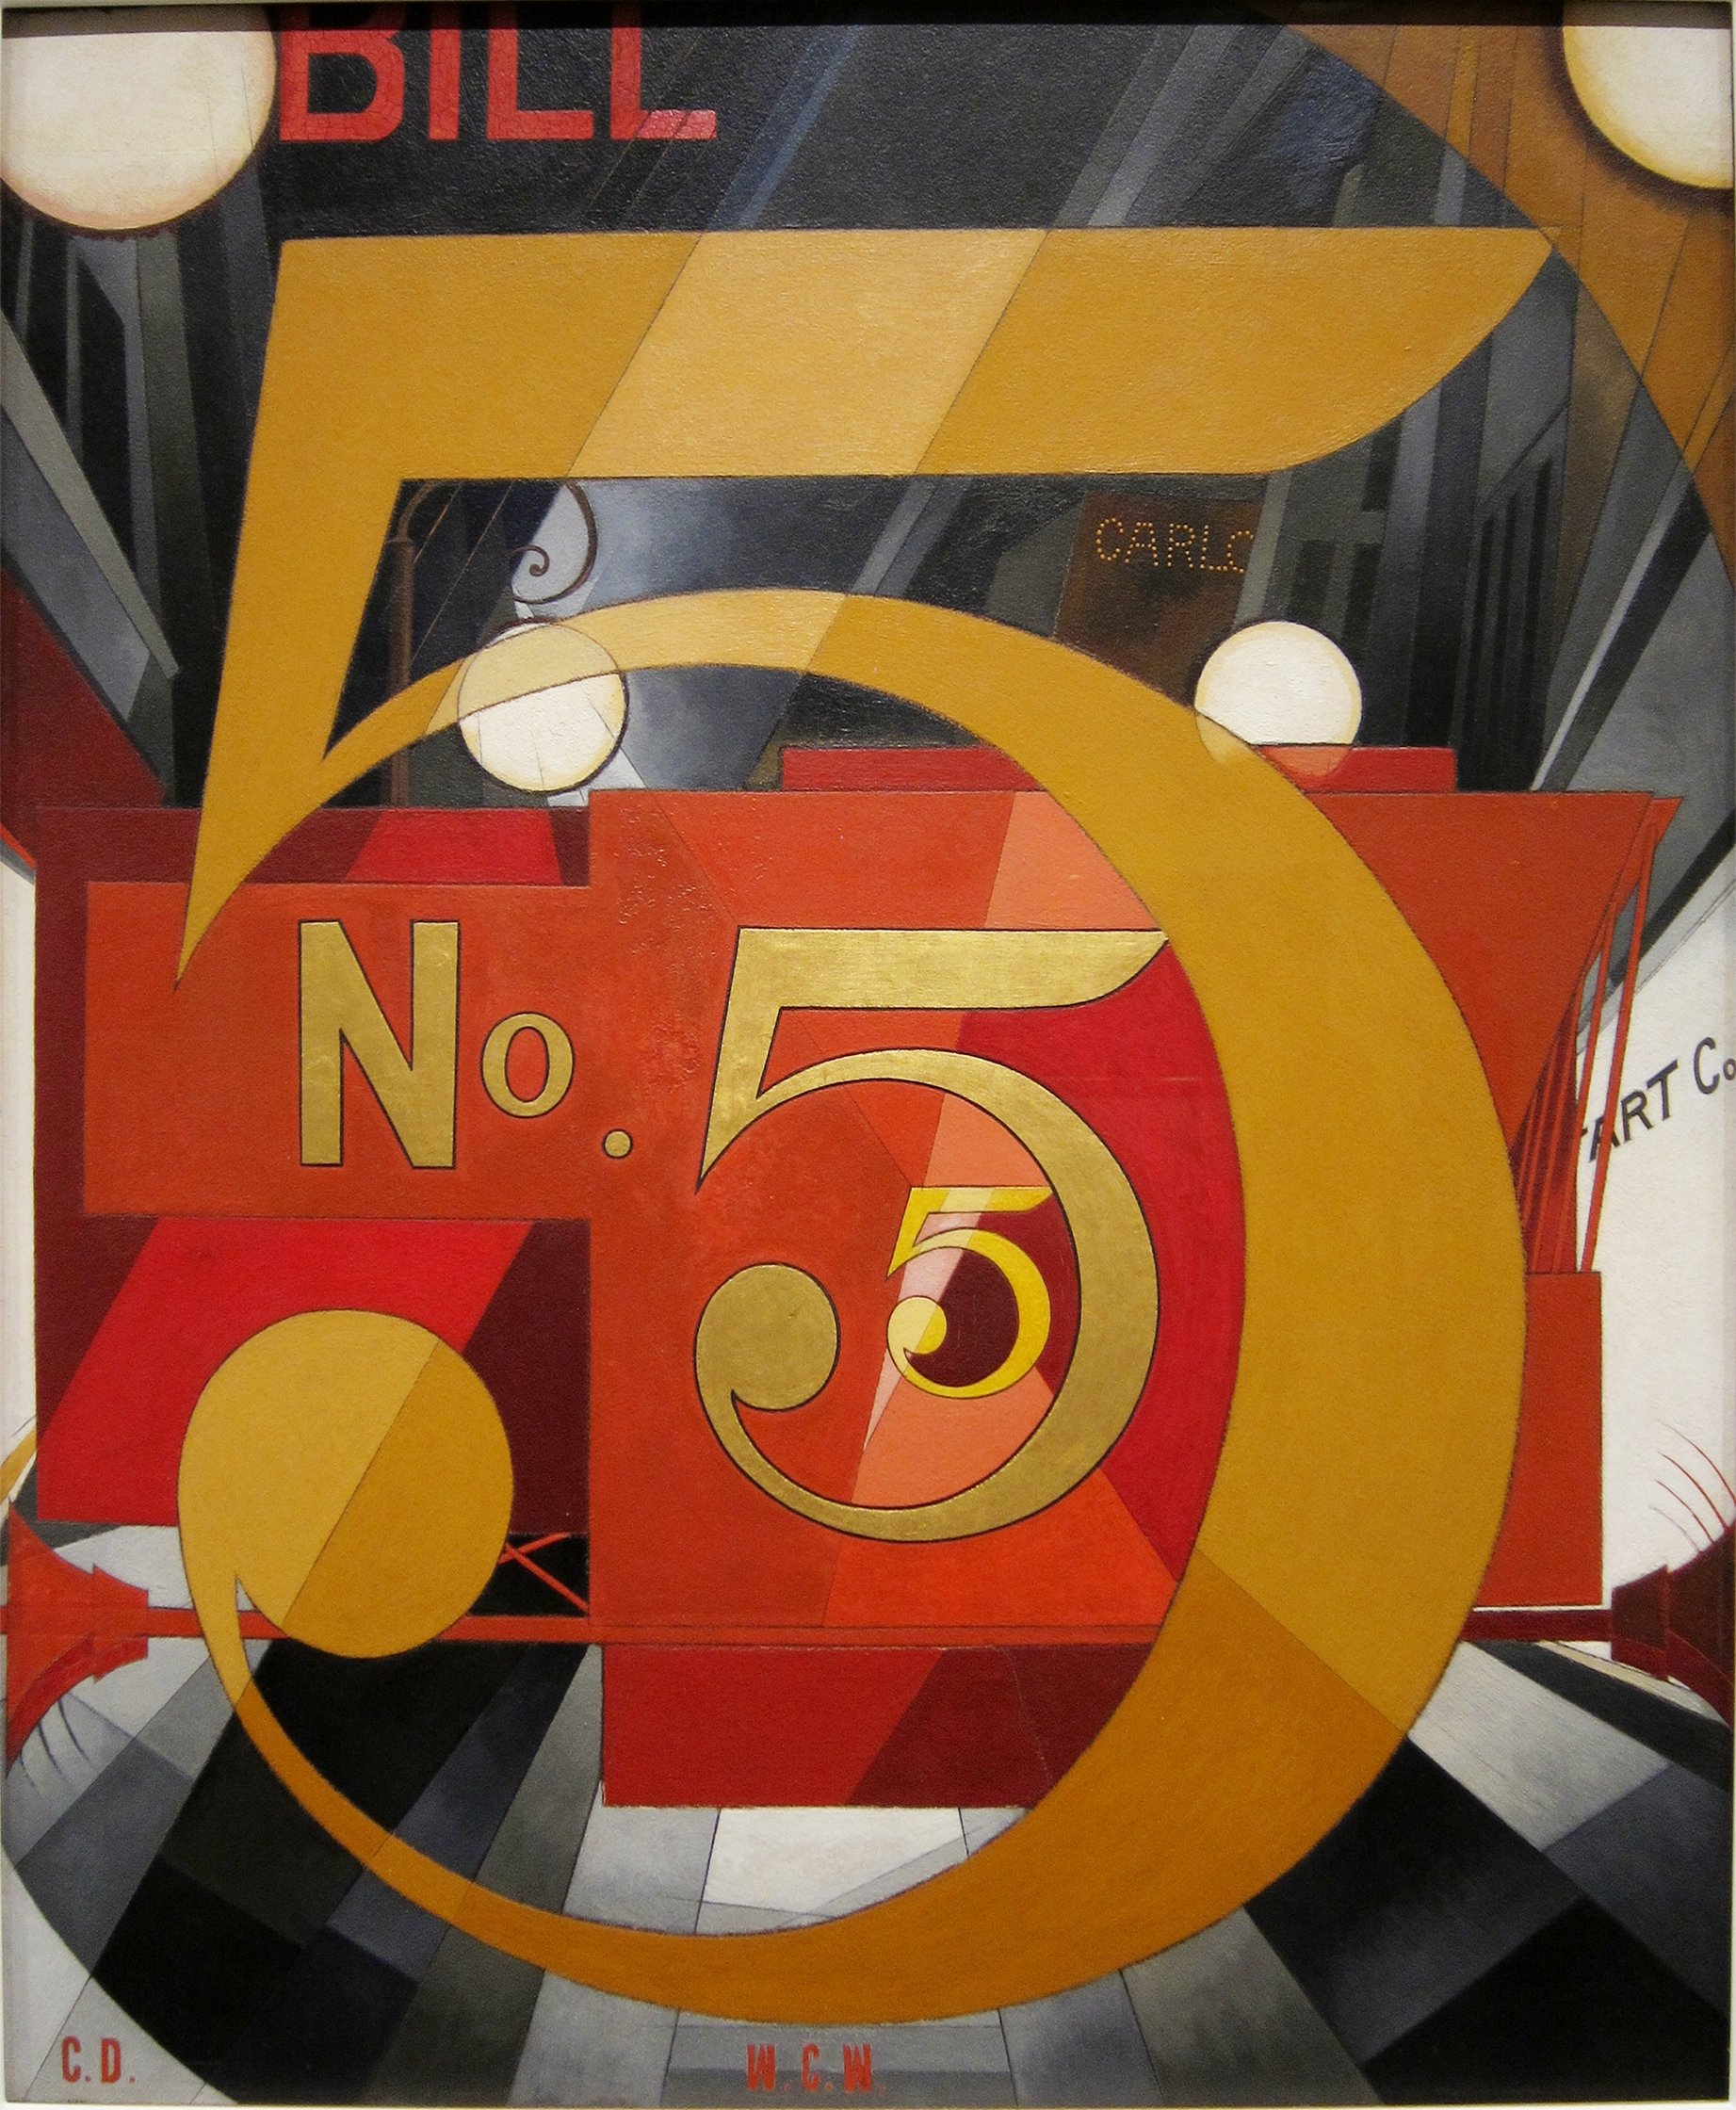 A lively depiction of an urban scene in bold yellows, blacks and reds, featuring intersecting lines and repeated instances of the number “5”. Street lamps, lights, and blaring fire engine sirens are suggested in abstract forms, creating a dynamic energy characteristic of a bustling city.